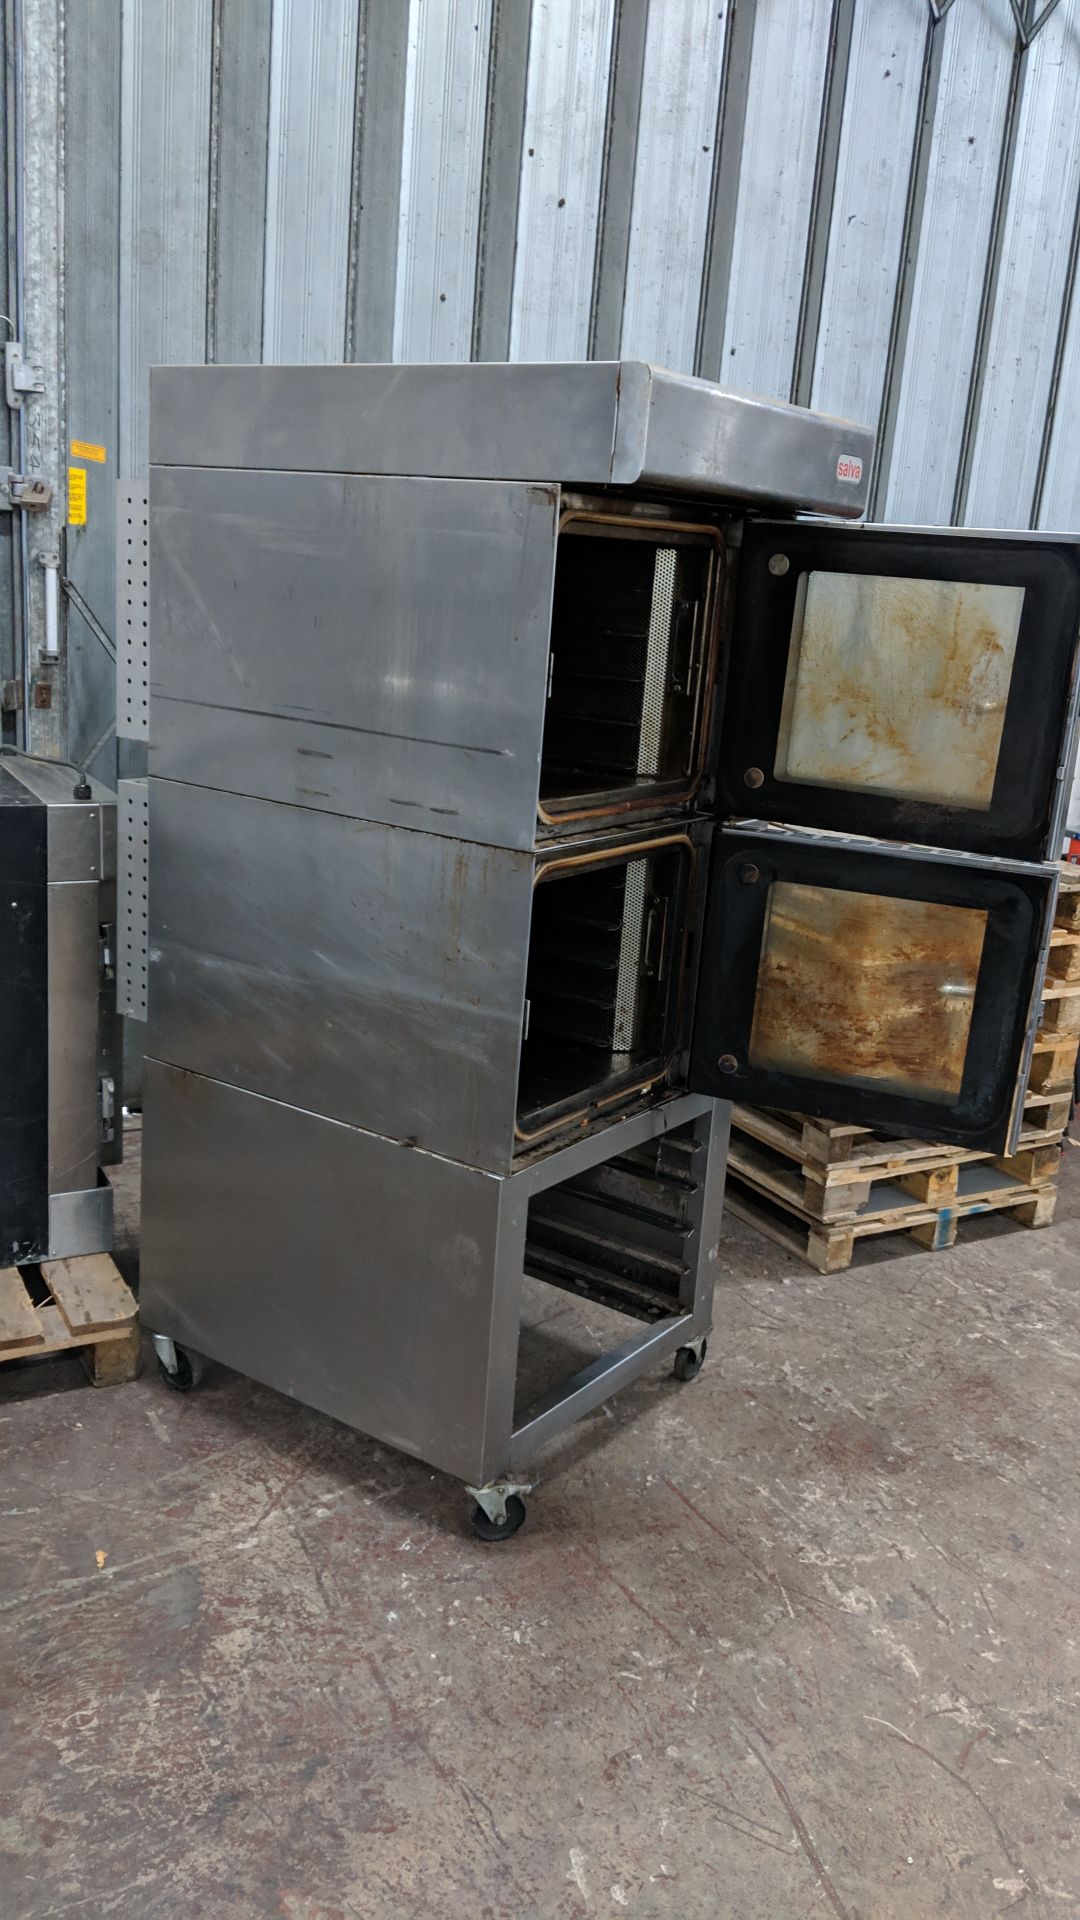 Salva twin vertical stack oven on mobile stand, type K-5+ H-E (marked as being "ex-Greggs" on the - Image 10 of 10